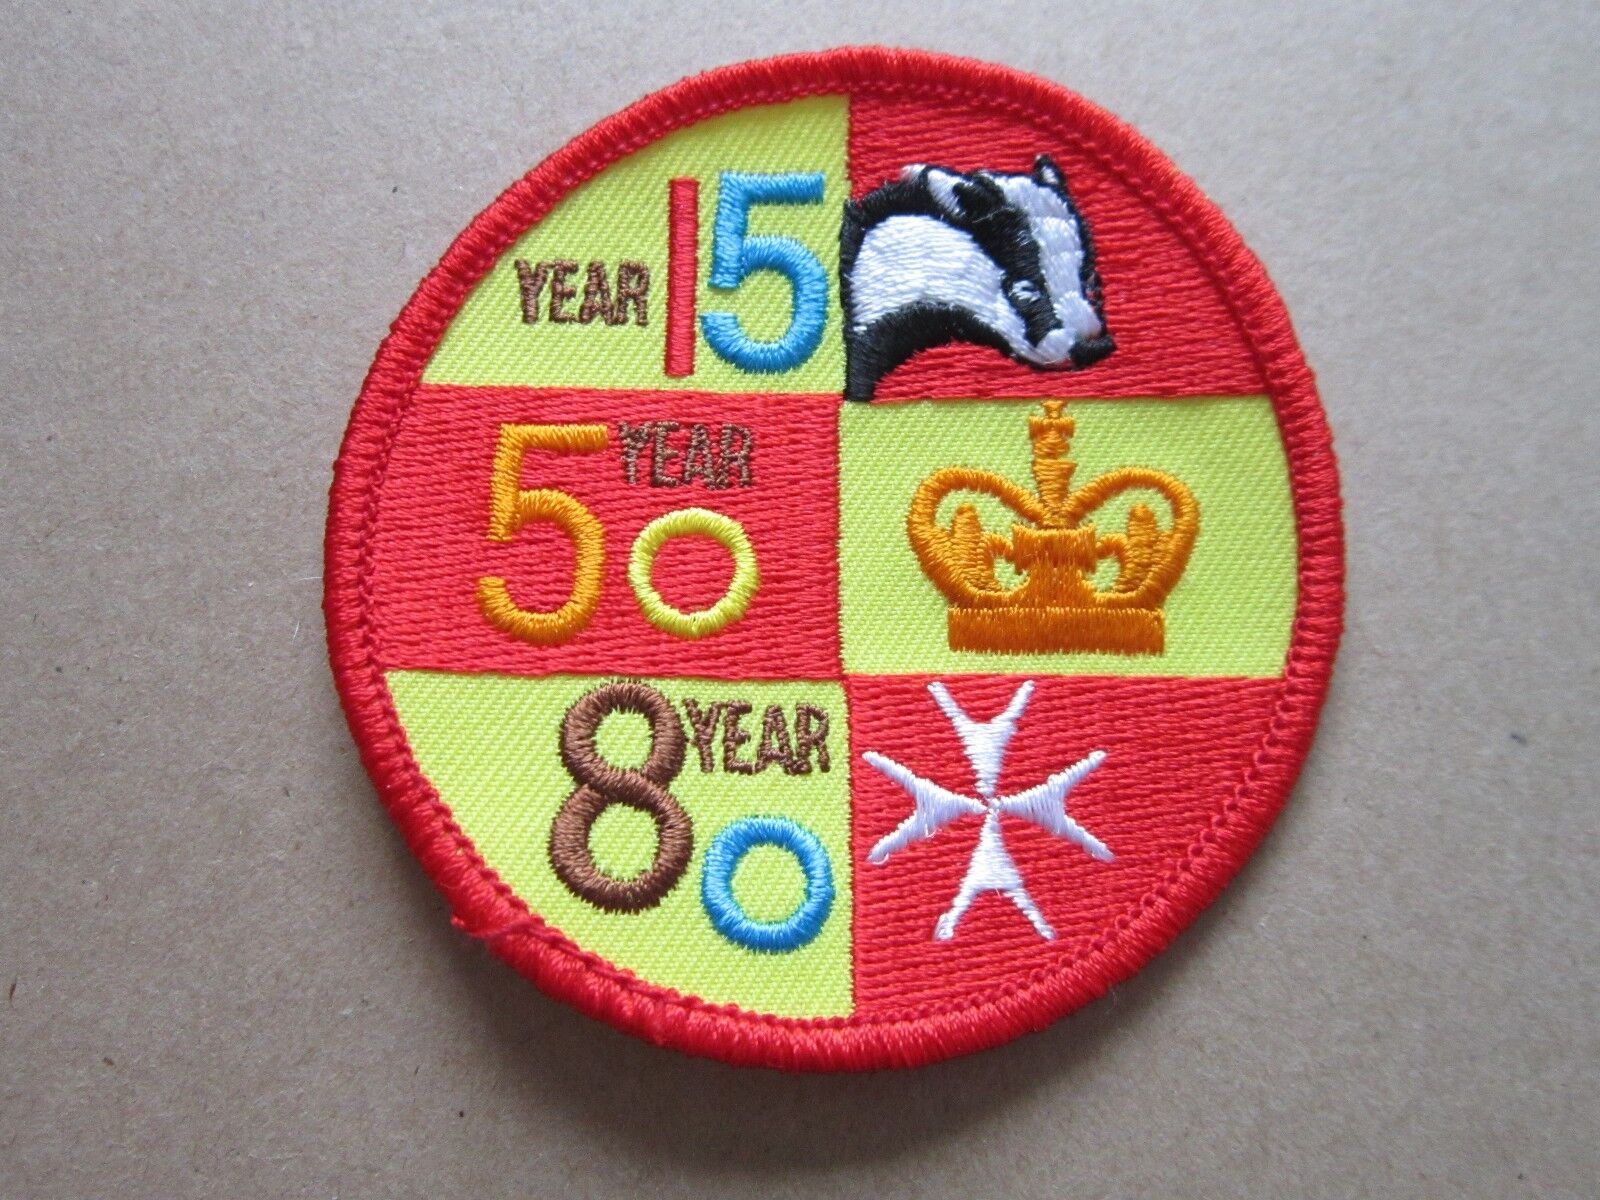 Year 15 50 80 Cloth Patch Badge Boy Scouts Scouting L5K G